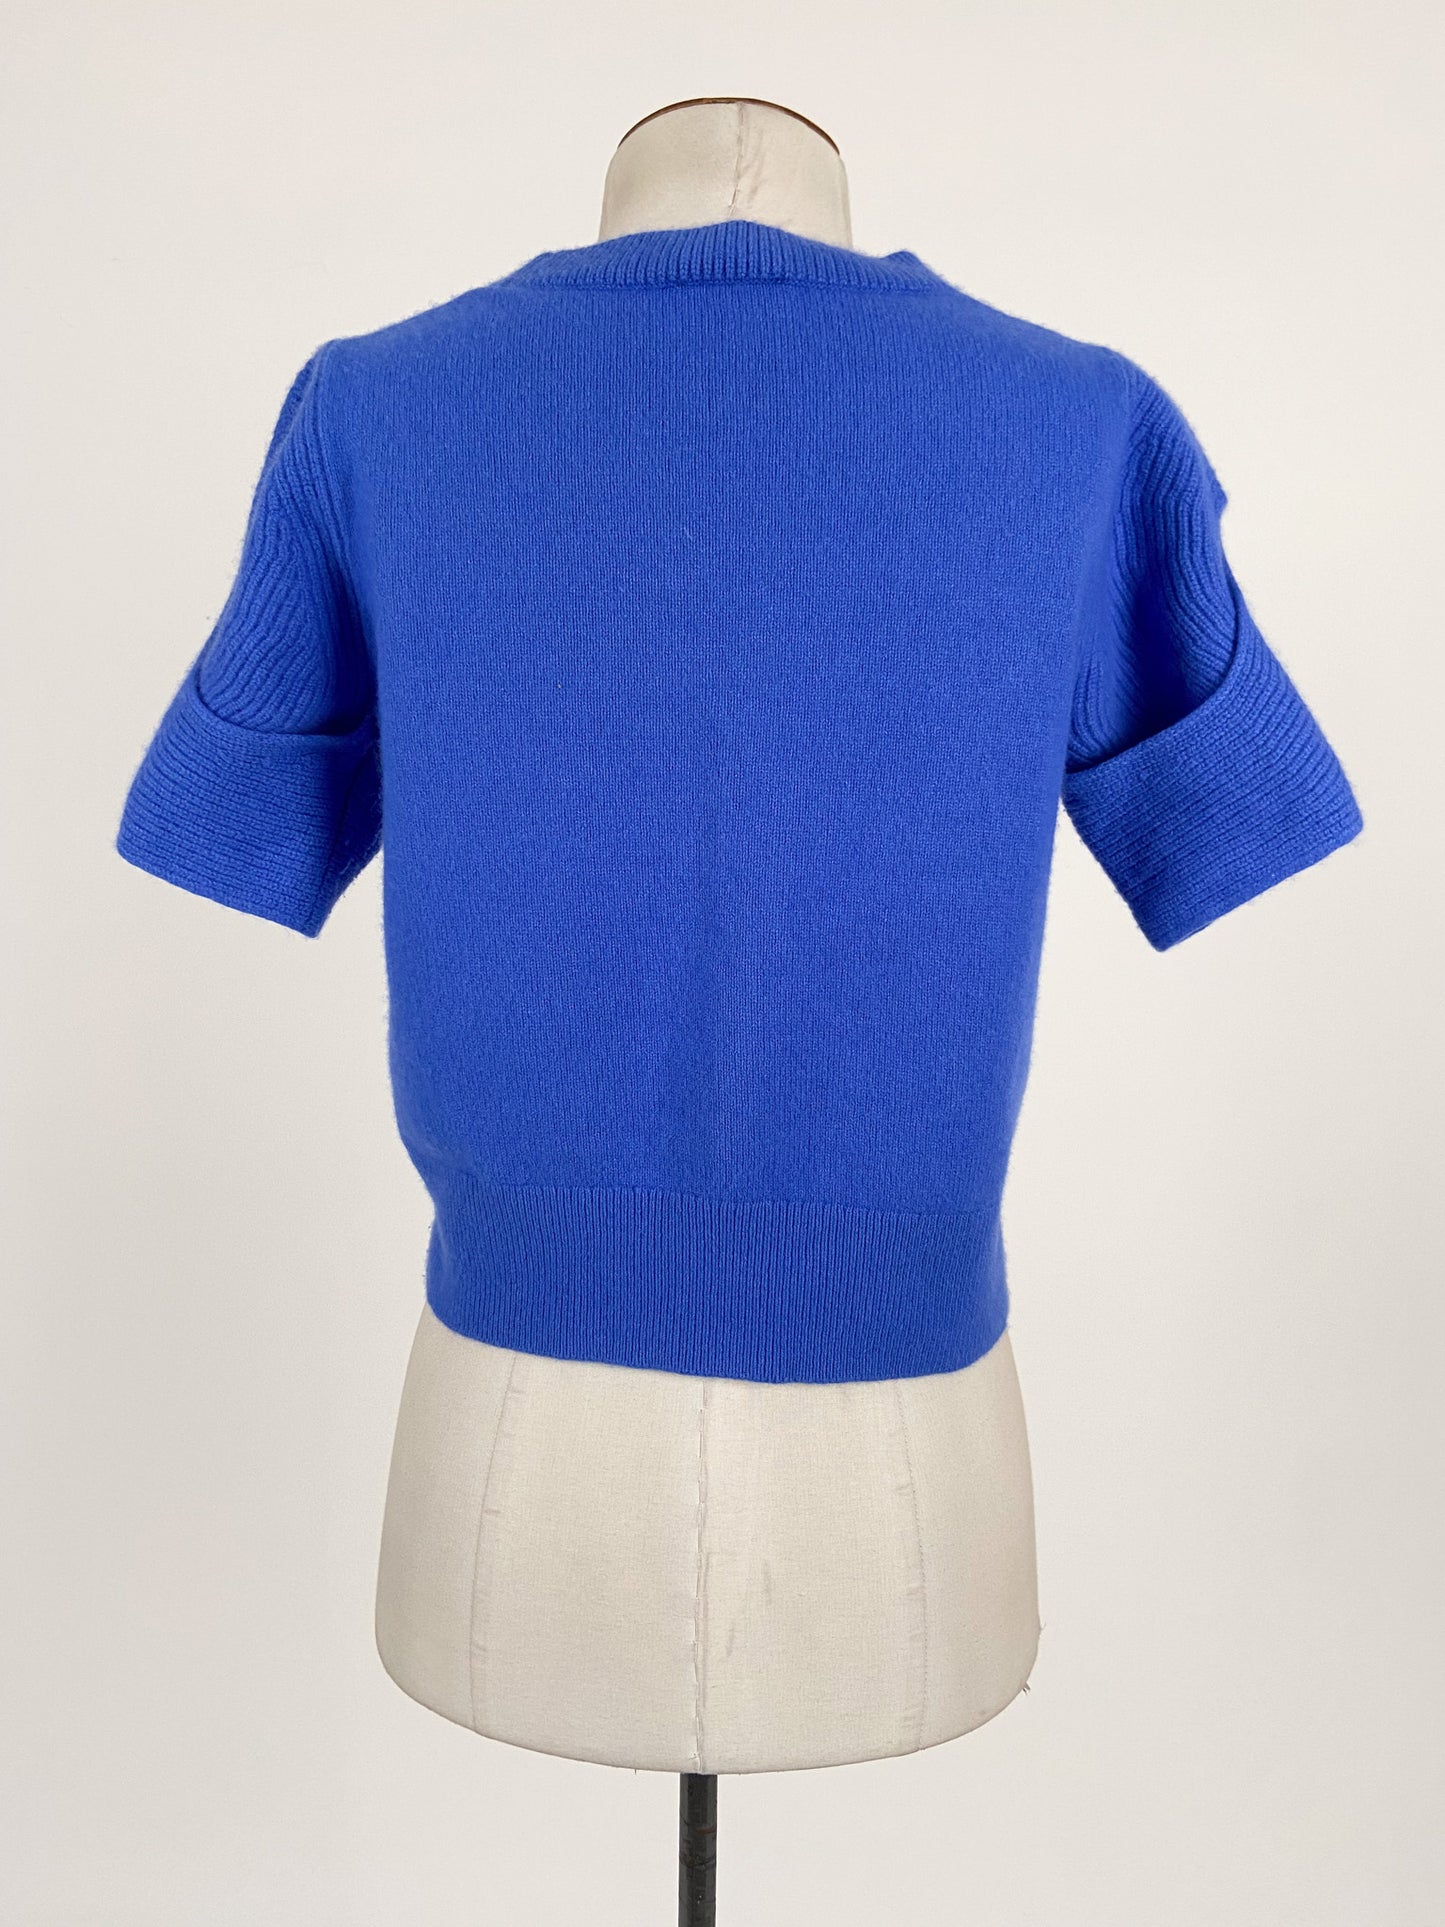 COS | Blue Casual/Workwear Jumper | Size XS